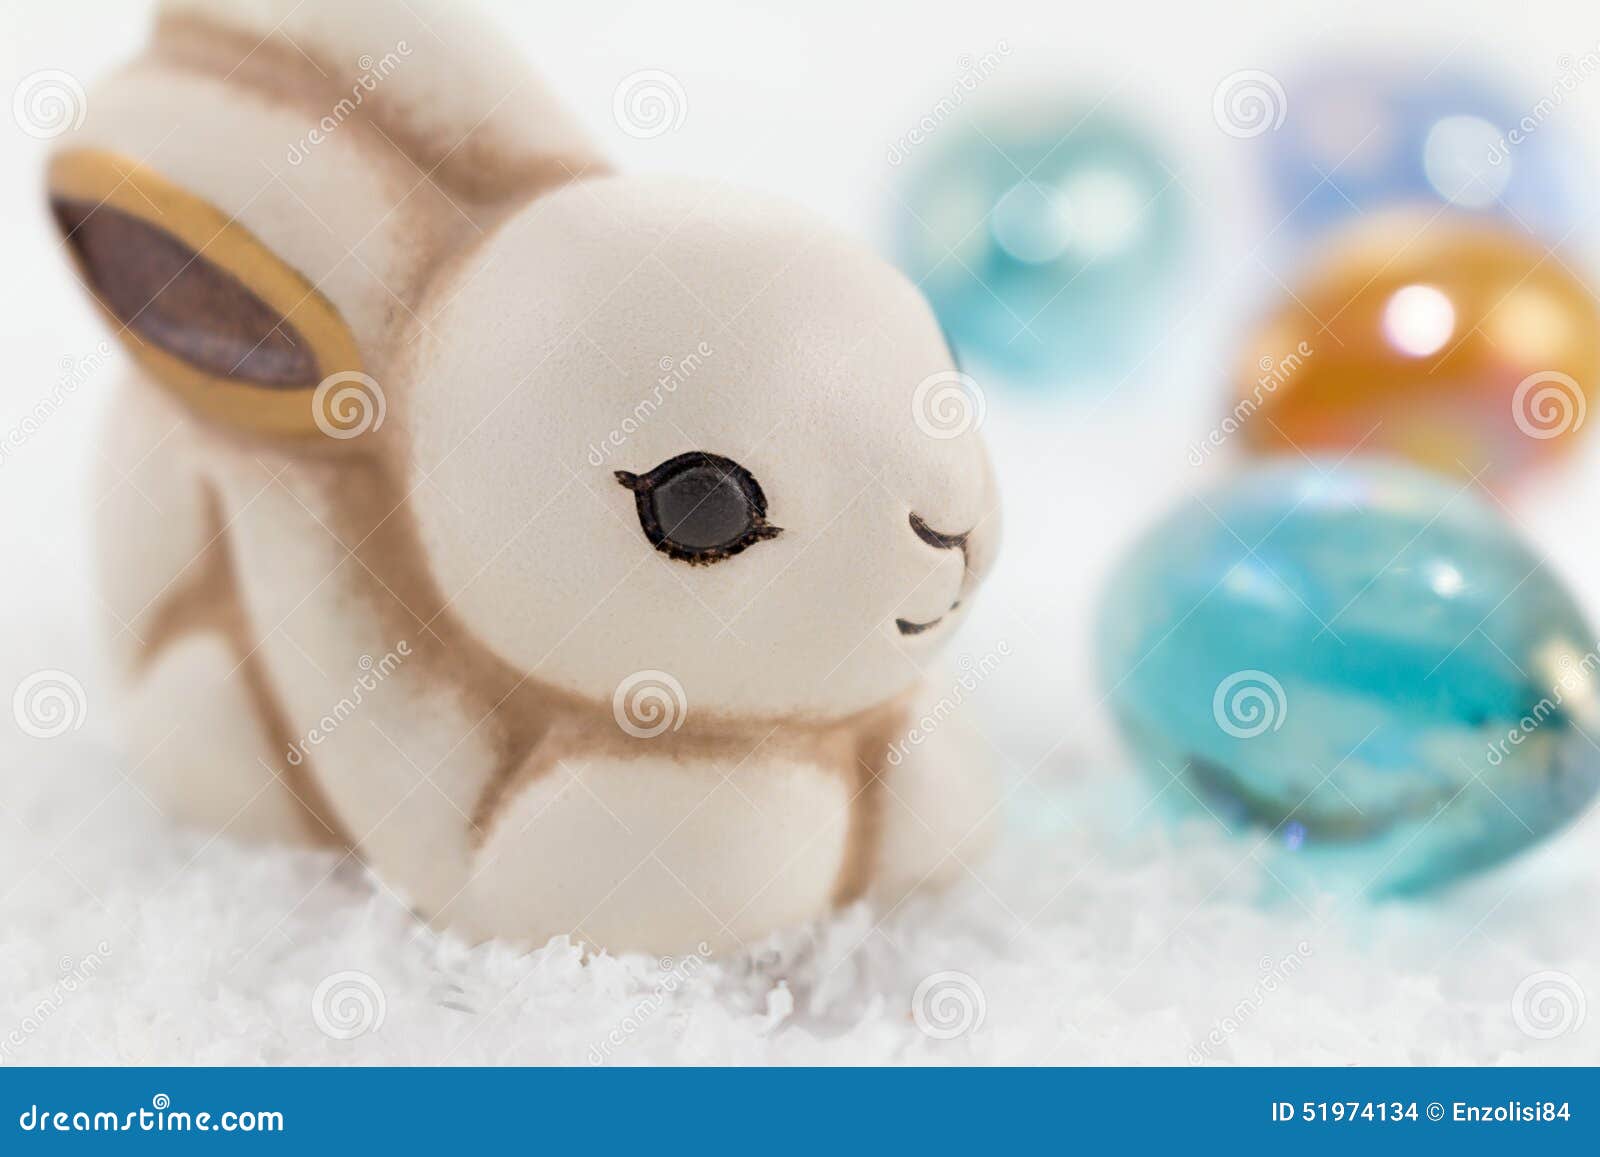 Easter bunny in the snow stock photo. Image of dessert - 51974134